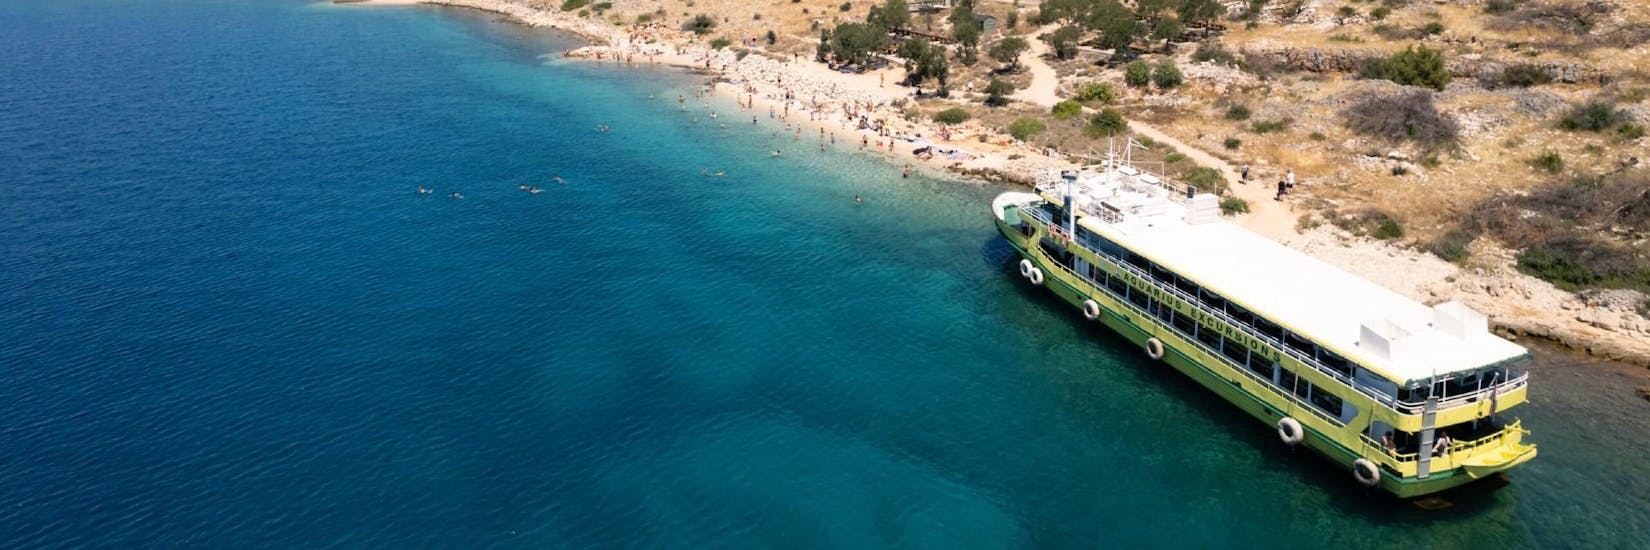 The boat of Aquarius Excursions Zadar in front of a beautiful beach during their boat tour.